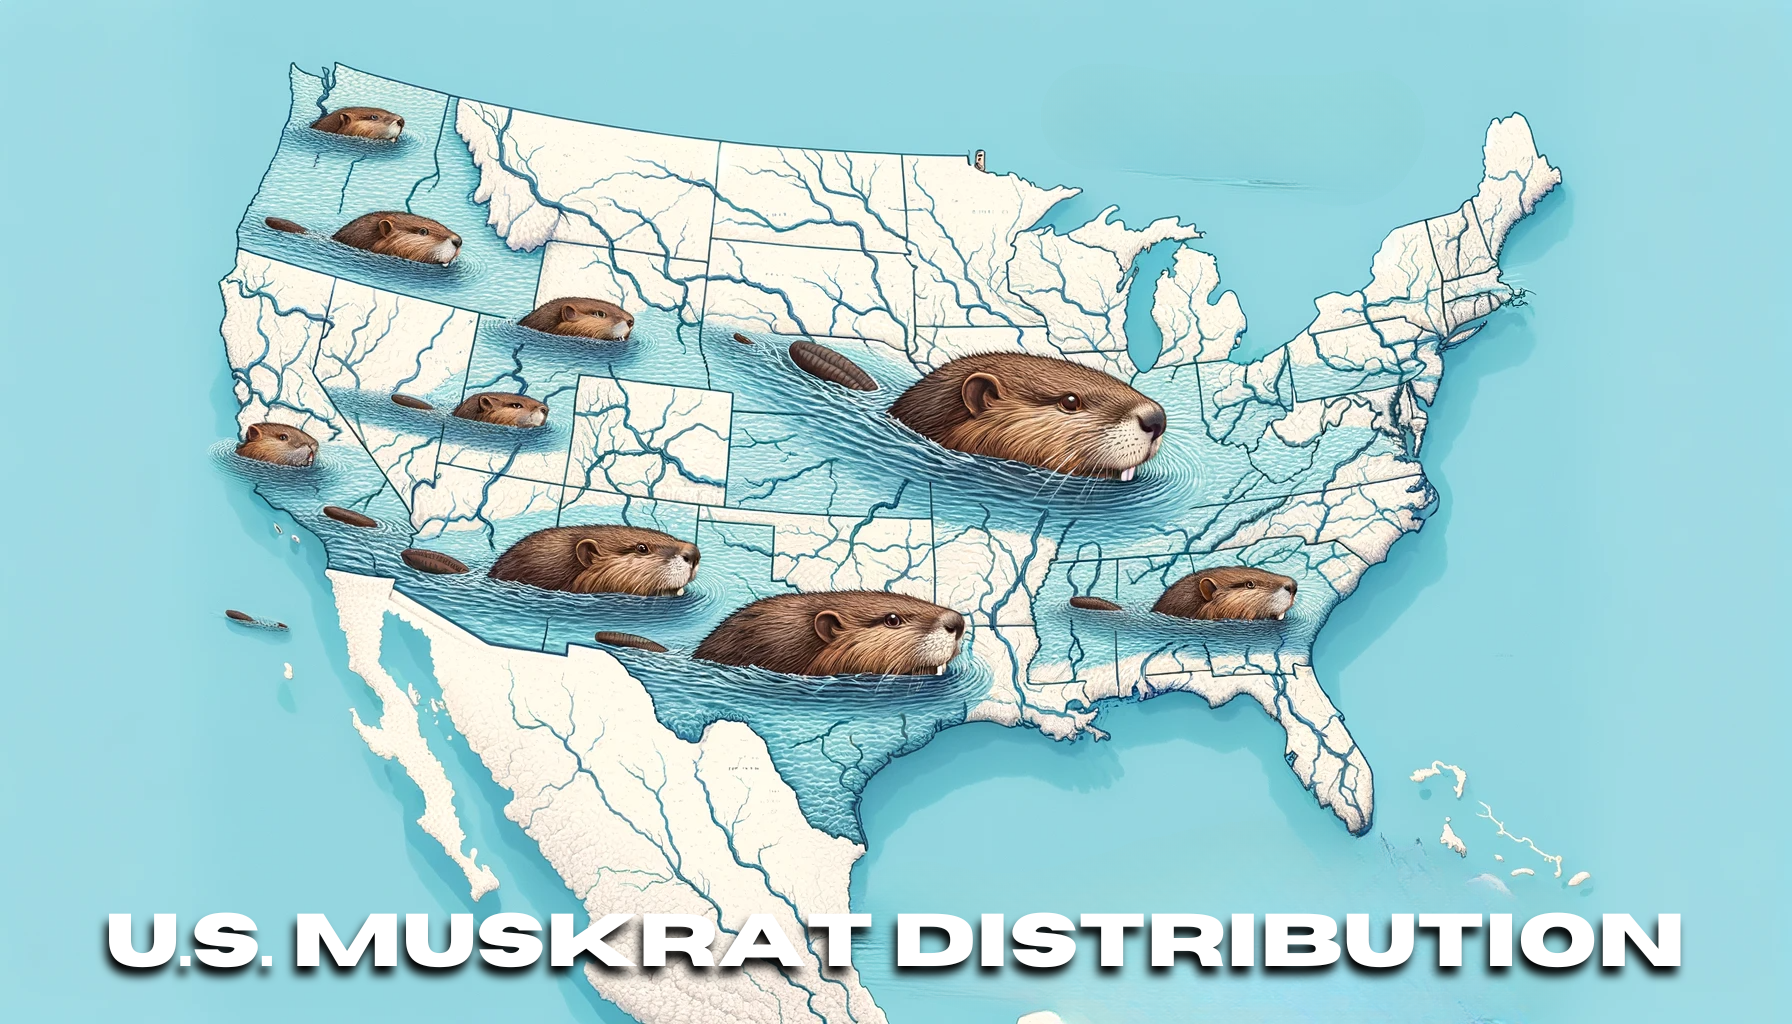 Muskrat Distribution in The United States